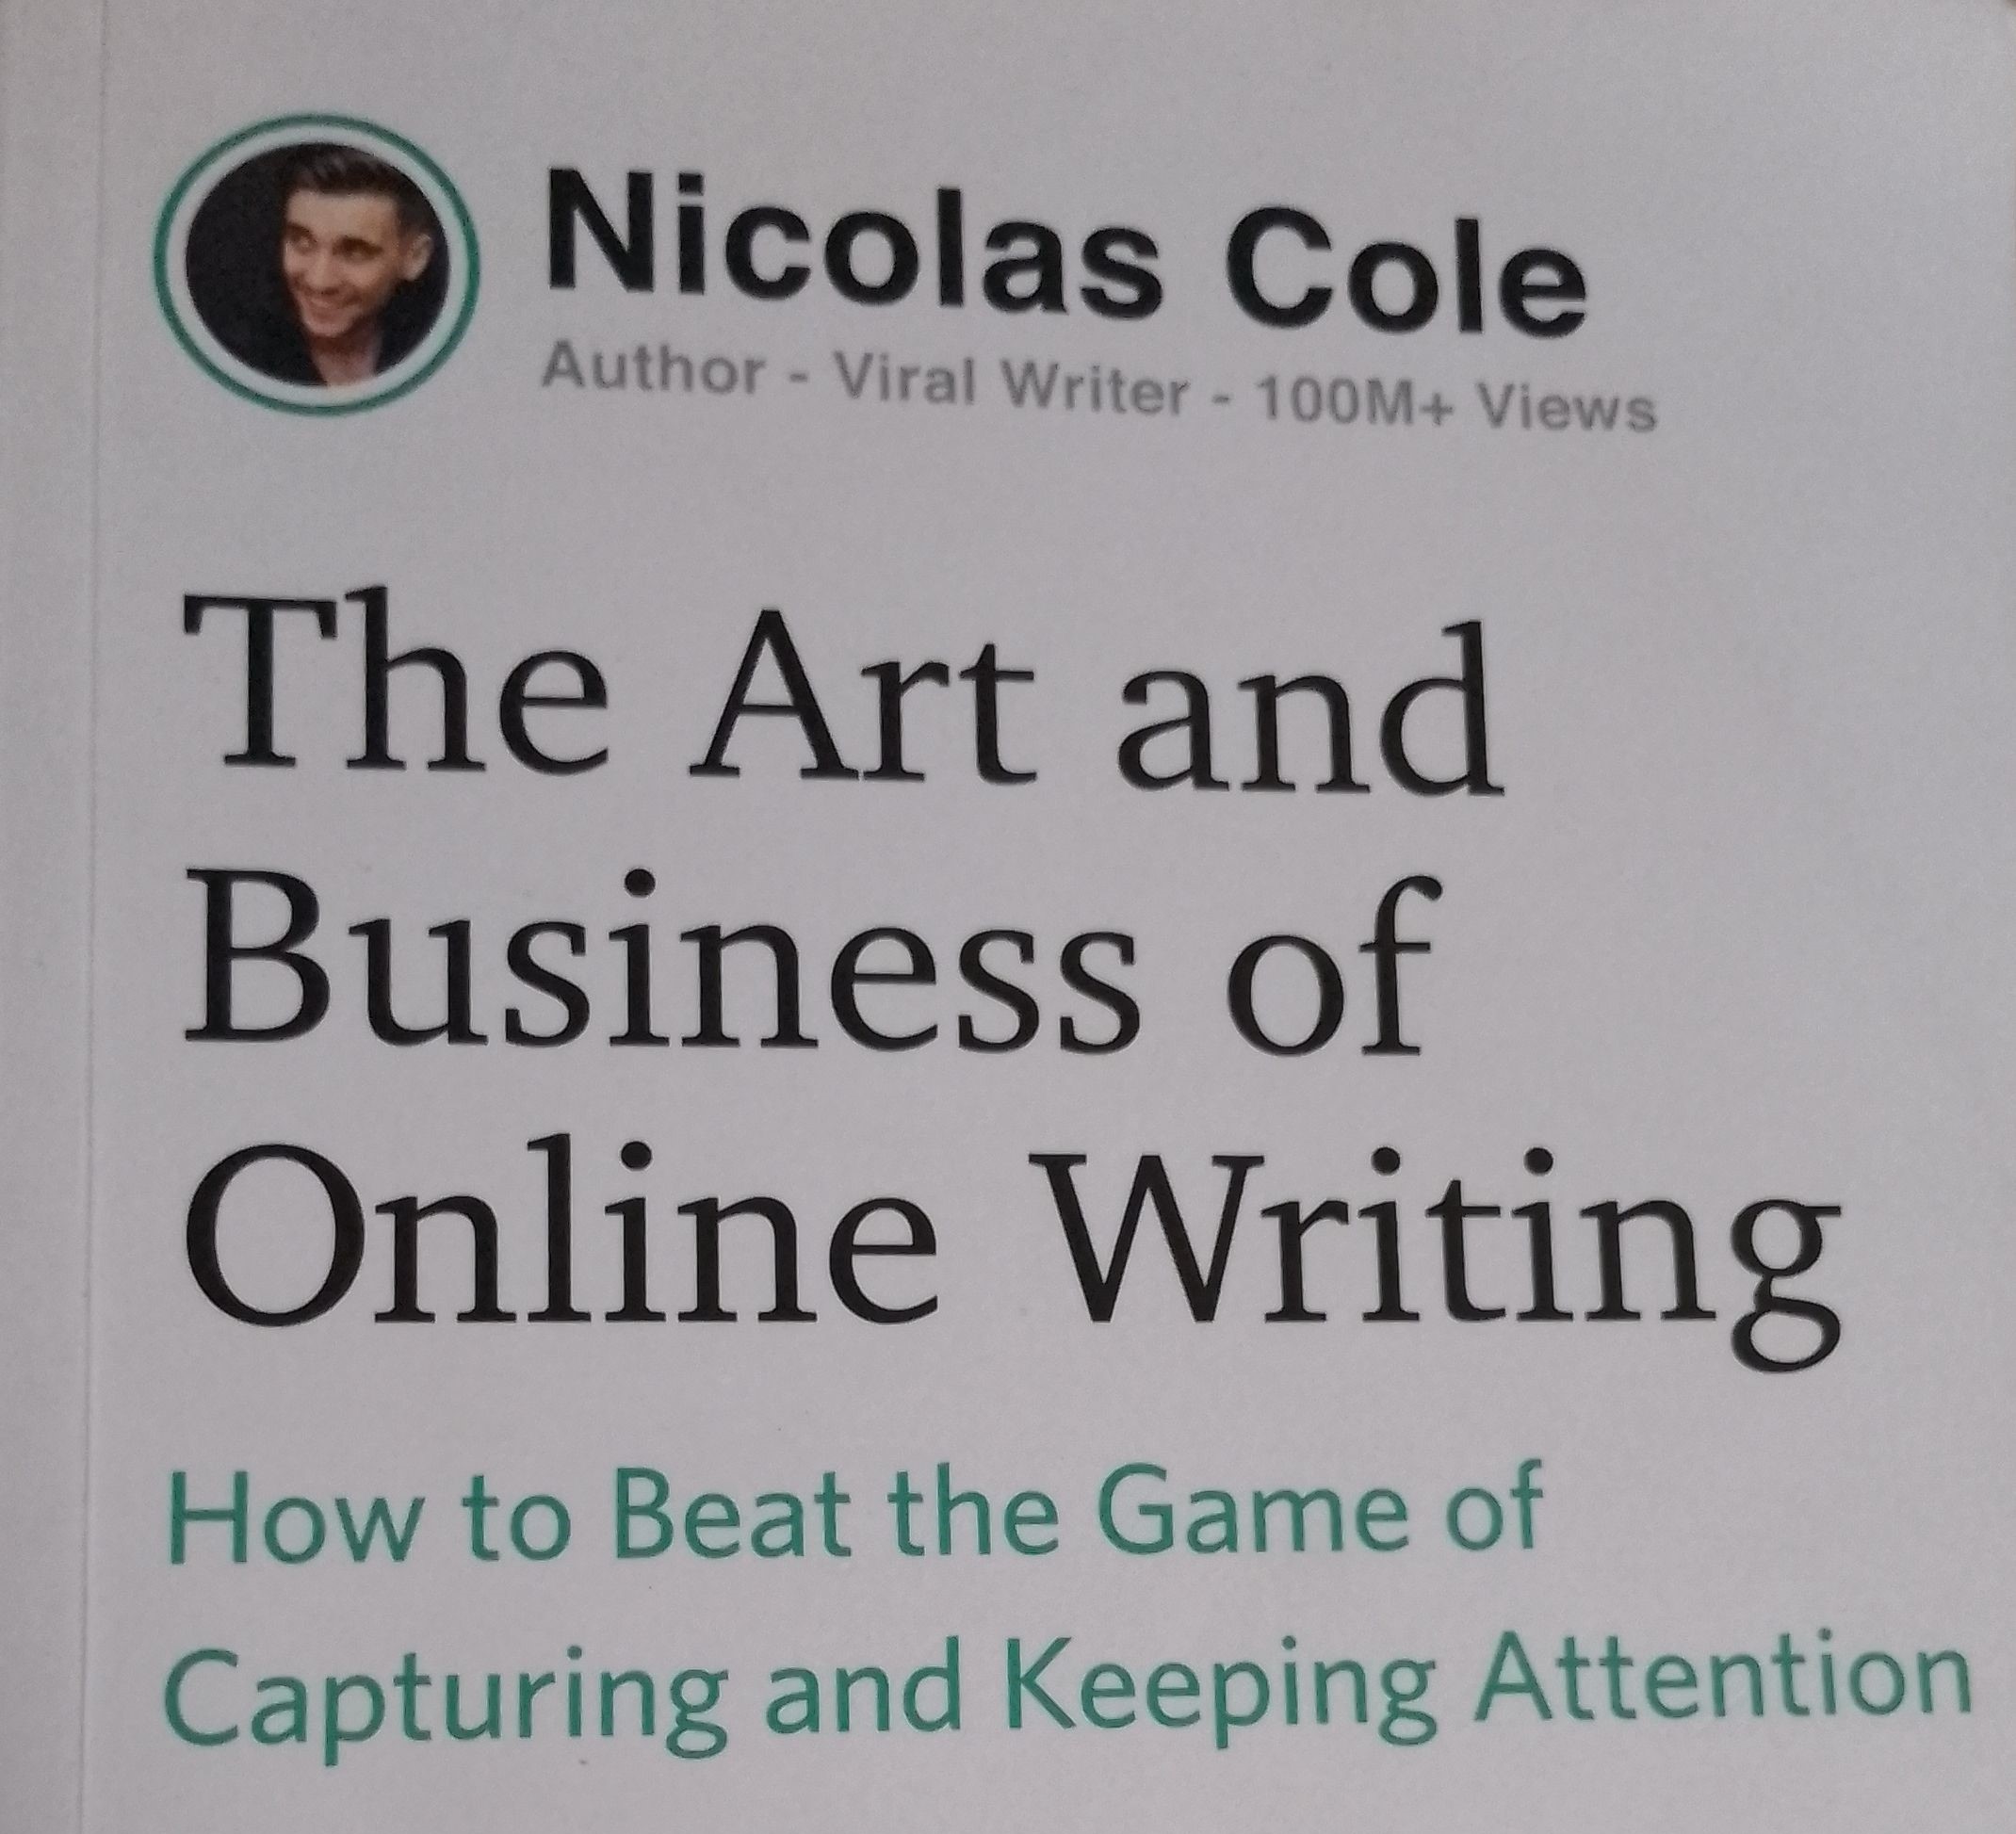 The Art and Business of Online Writing — Nicolas Cole